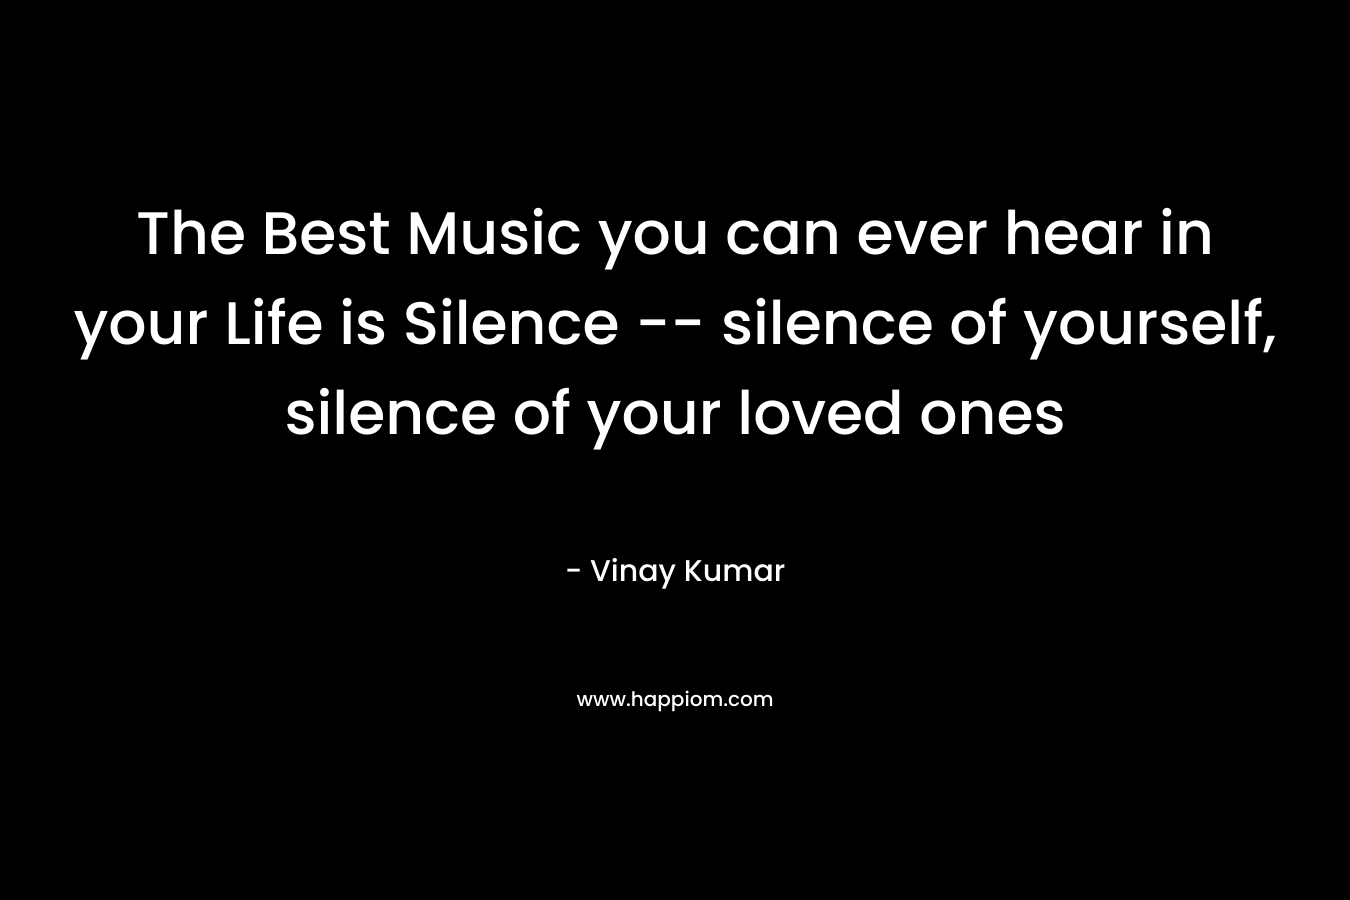  The Best Music you can ever hear in your Life is Silence -- silence of yourself, silence of your loved ones 